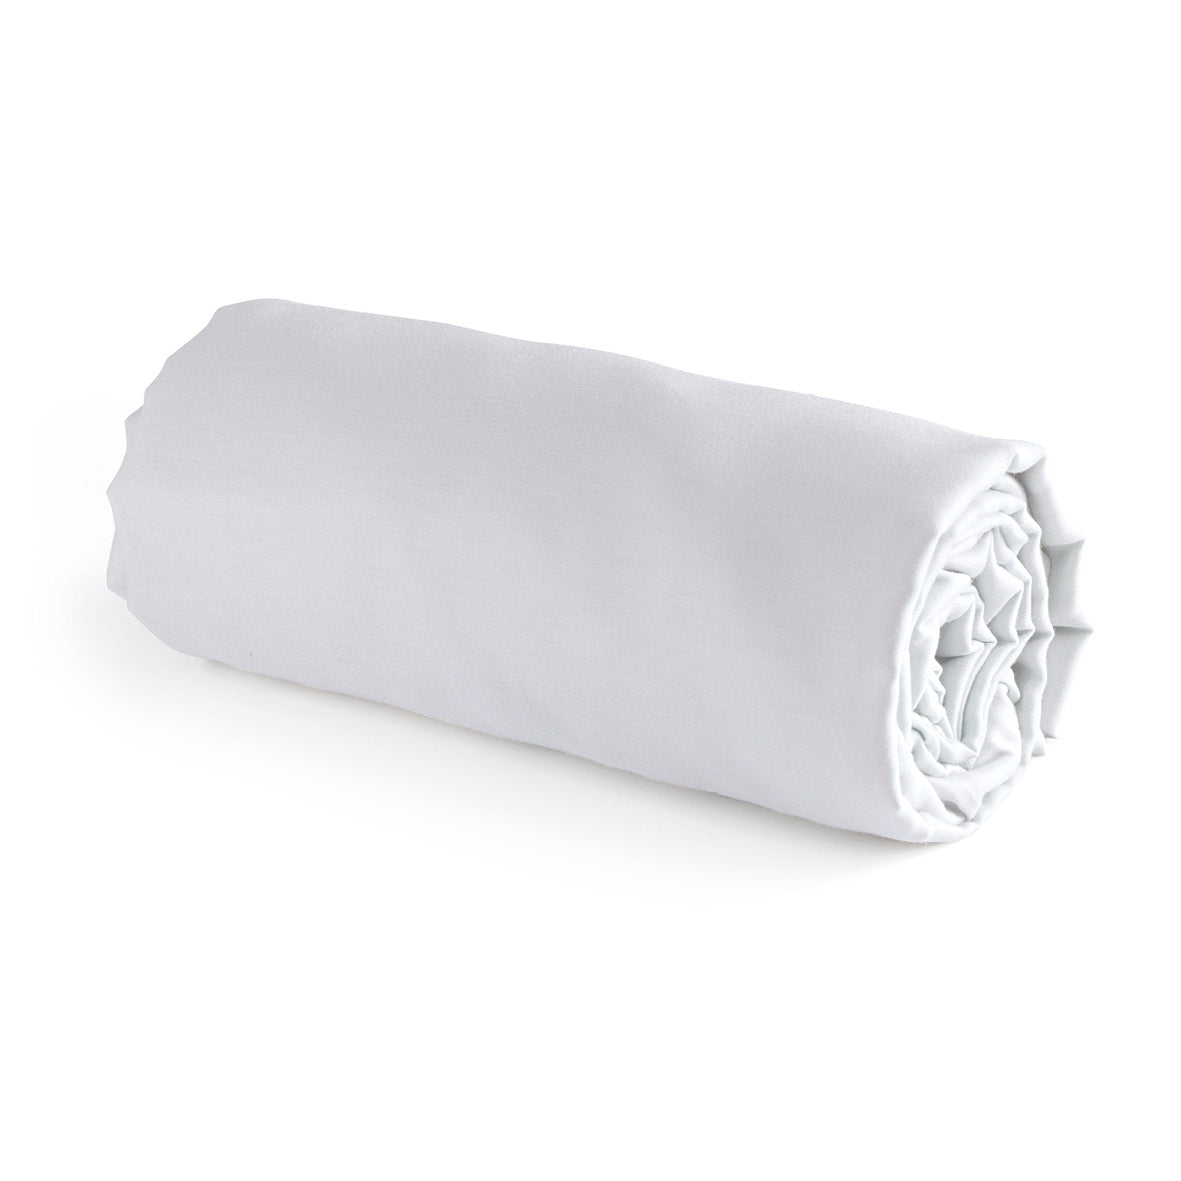 Fitted sheet cotton satin - White